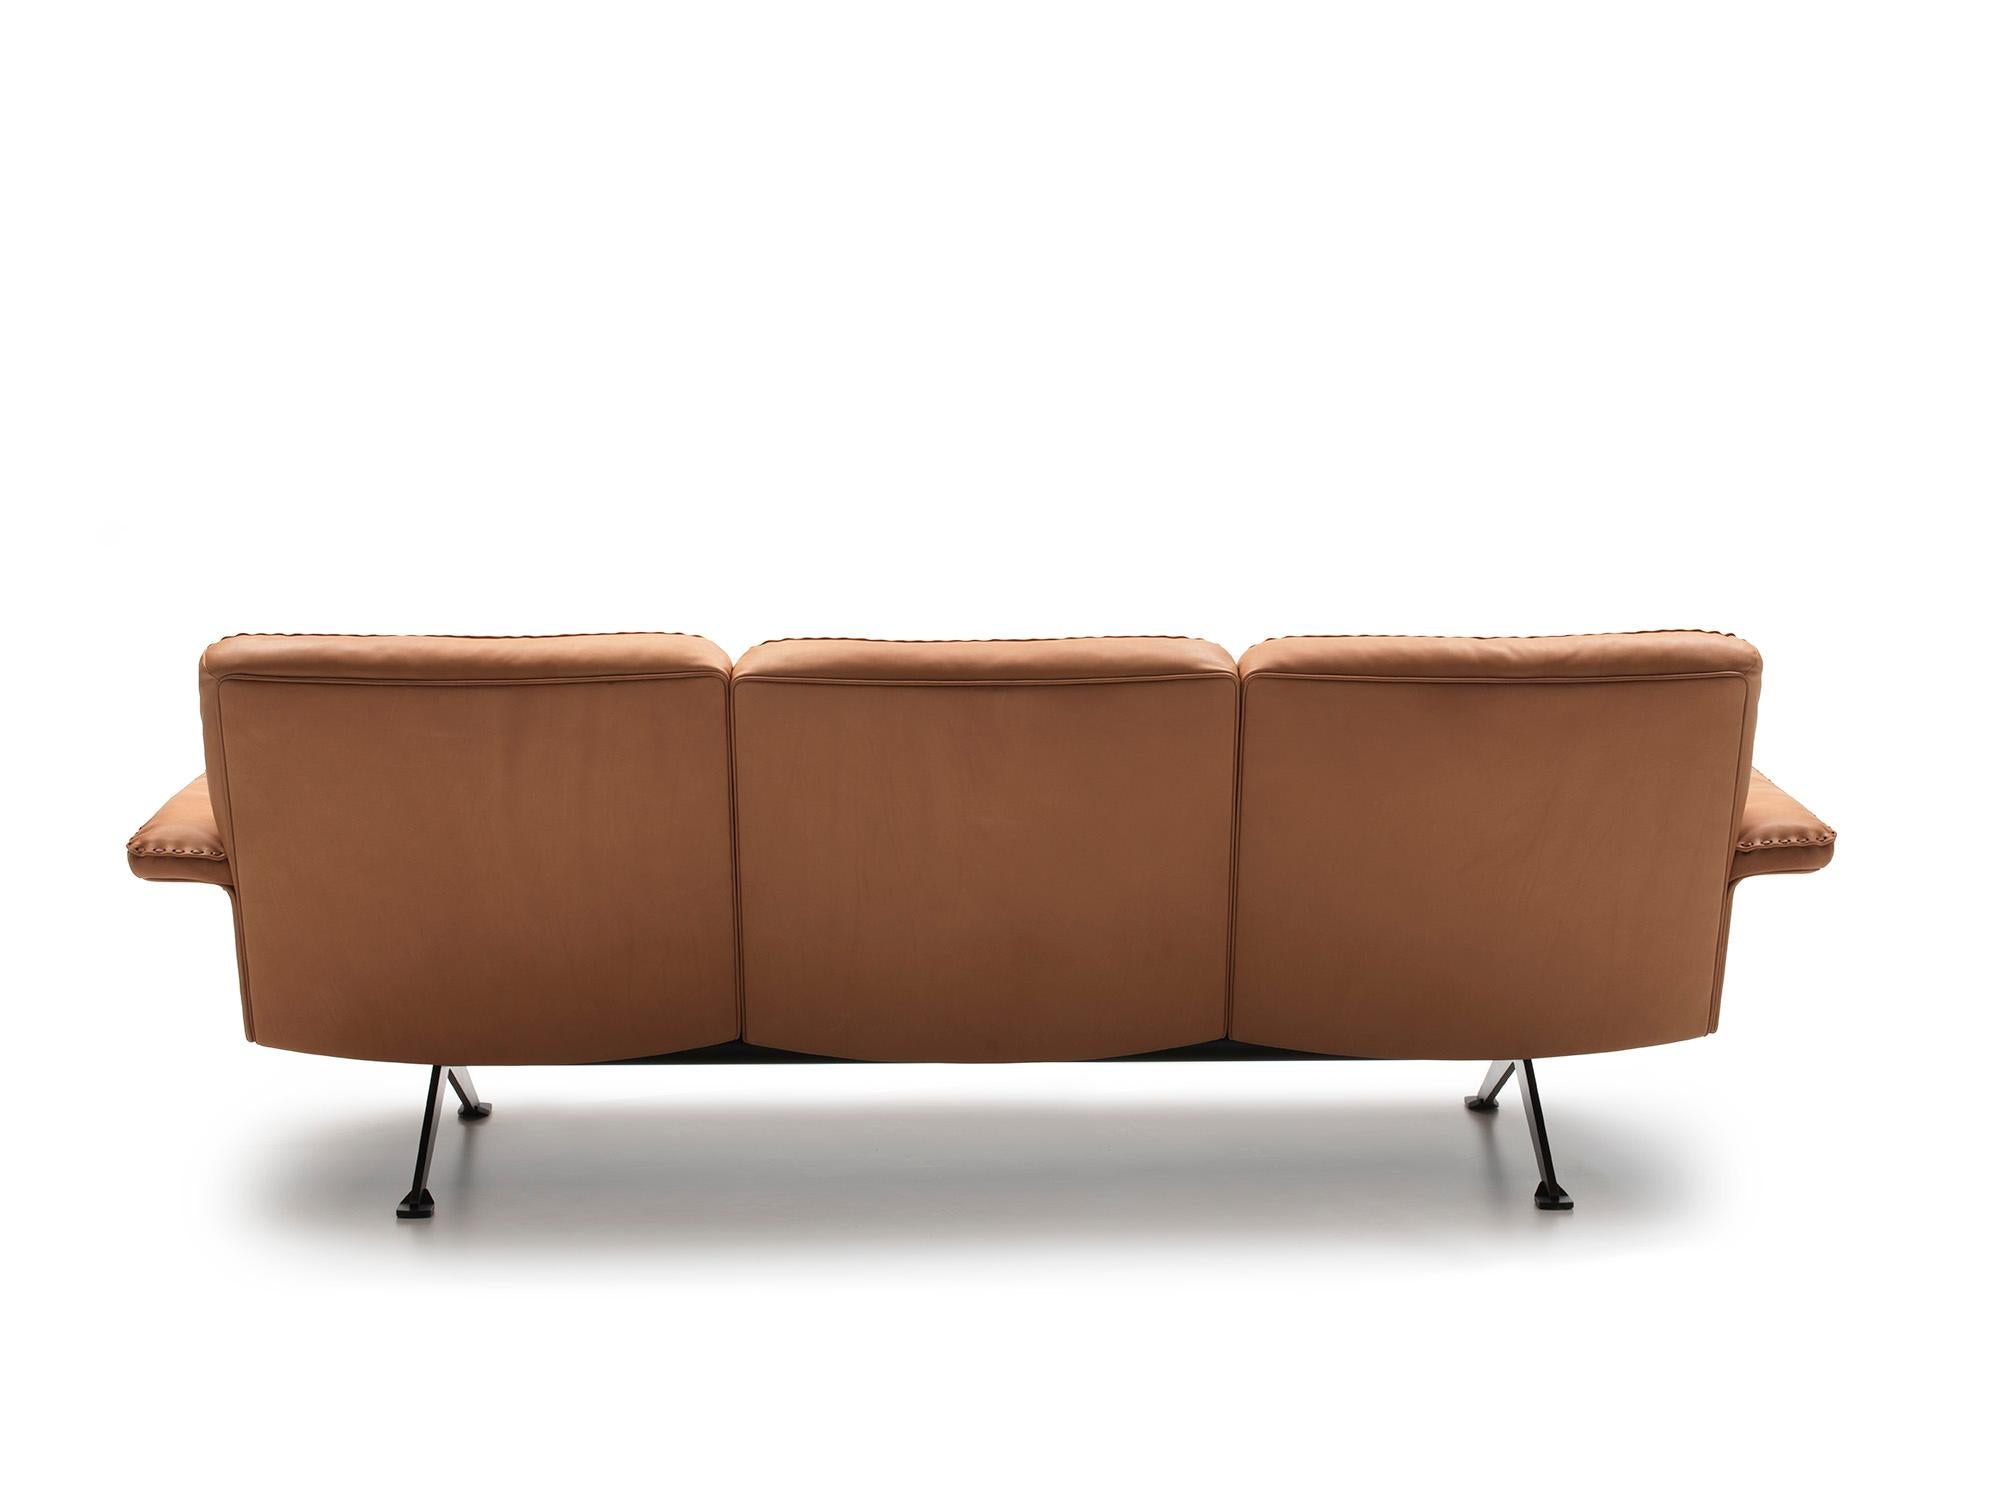 The DS-31 model series is one of the classics of our manufacture. This is where design, craftsmanship and leather expertise come together to form a timelessly beautiful item of upholstered furniture. The design presents itself in a light look: back